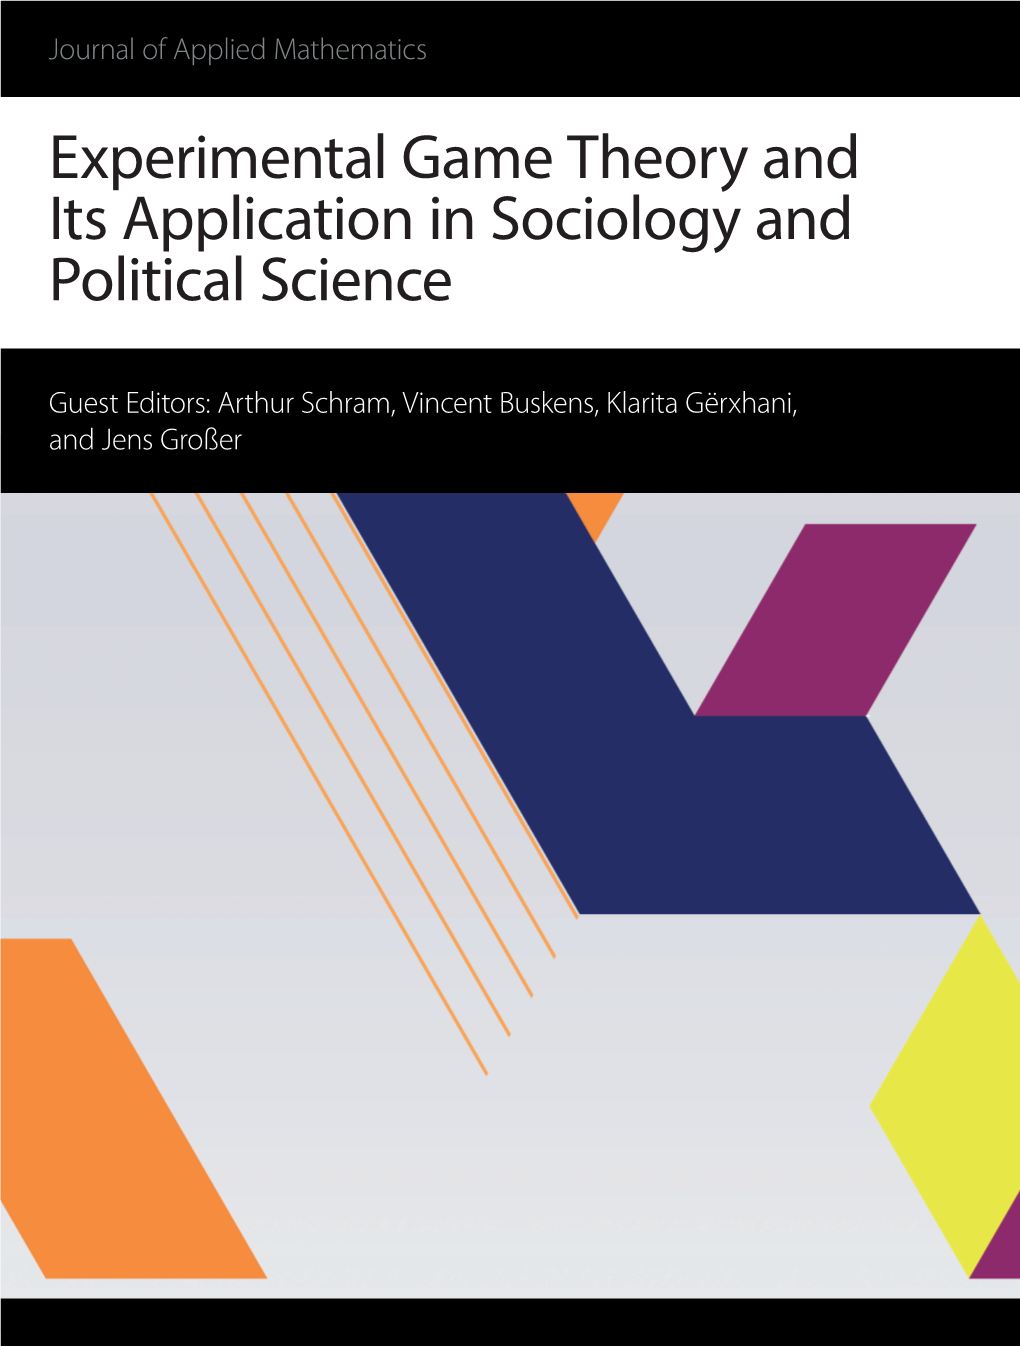 Experimental Game Theory and Its Application in Sociology and Political Science